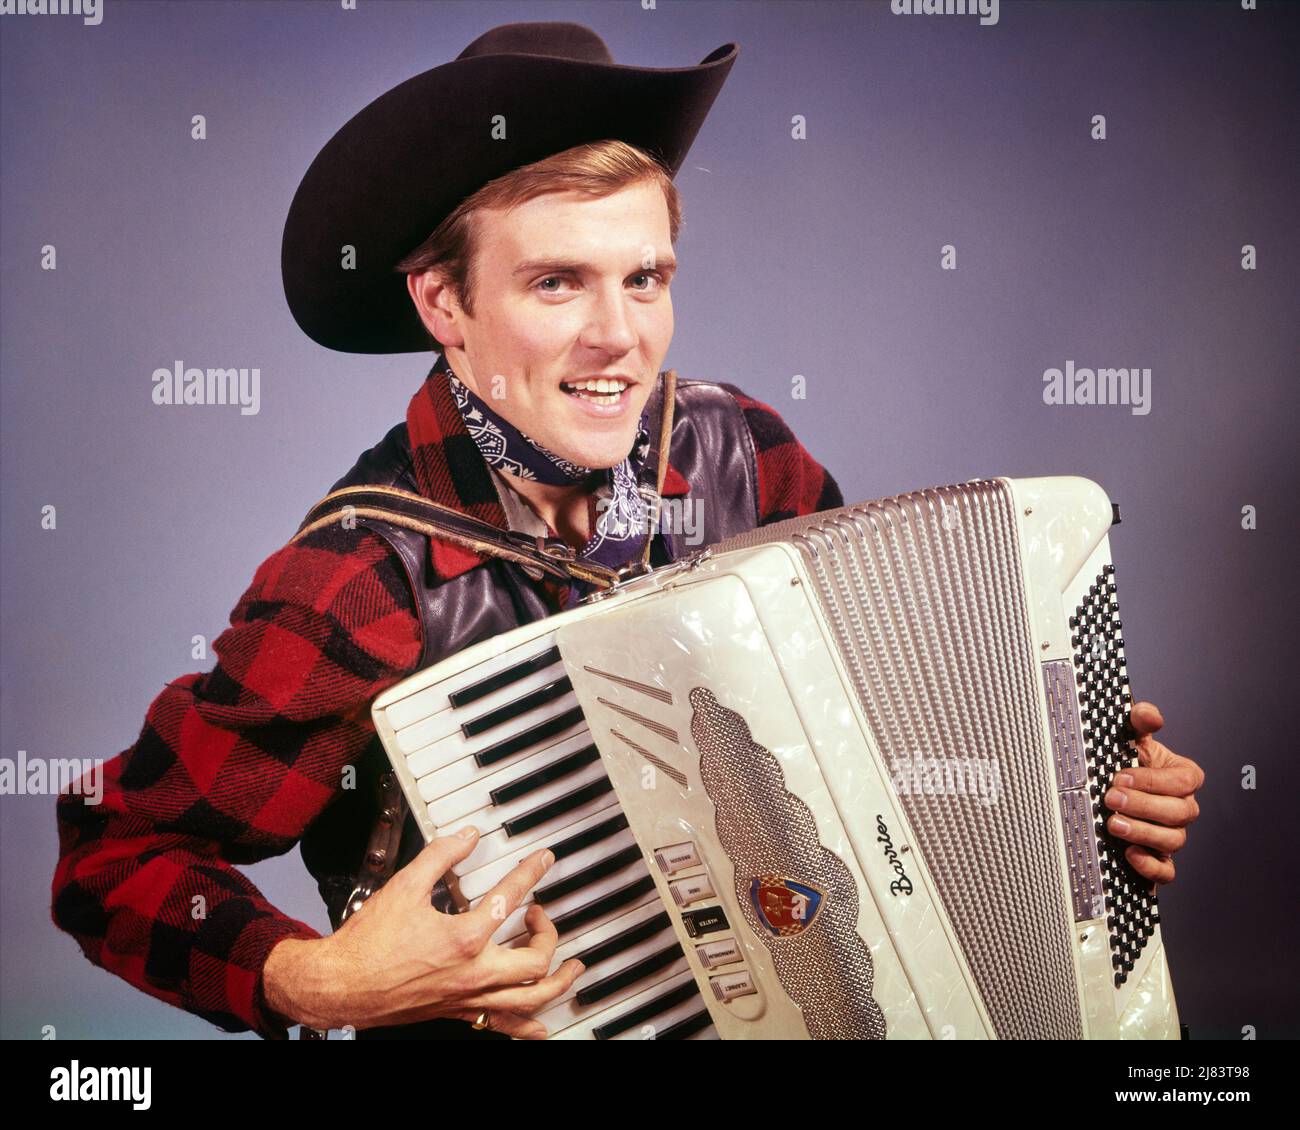 1960s SMILING MAN WEARING COWBOY HAT PLAYING COUNTRY WESTERN MUSIC ON AN ACCORDION LOOKING AT CAMERA - km1279 HAR001 HARS SINGER YOUNG ADULT SINGERS PLEASED JOY LIFESTYLE SOUND SATISFACTION ACTOR MUSICIAN STUDIO SHOT RURAL HEALTHINESS WOOL COPY SPACE FRIENDSHIP HALF-LENGTH PERSONS CHARACTER MALES WESTERN PLAID PROFESSION ENTERTAINMENT CONFIDENCE AMERICANA EXPRESSIONS EYE CONTACT COWBOYS PERFORMING ARTS OCCUPATION HAPPINESS ACCORDION HEAD AND SHOULDERS CHEERFUL PERFORMER AND CAREERS EXCITEMENT SONG VOCAL PRIDE ENTERTAINER OCCUPATIONS SMILES MUSICAL INSTRUMENT VOCALIZE CONCEPTUAL VOCALS ACTORS Stock Photo